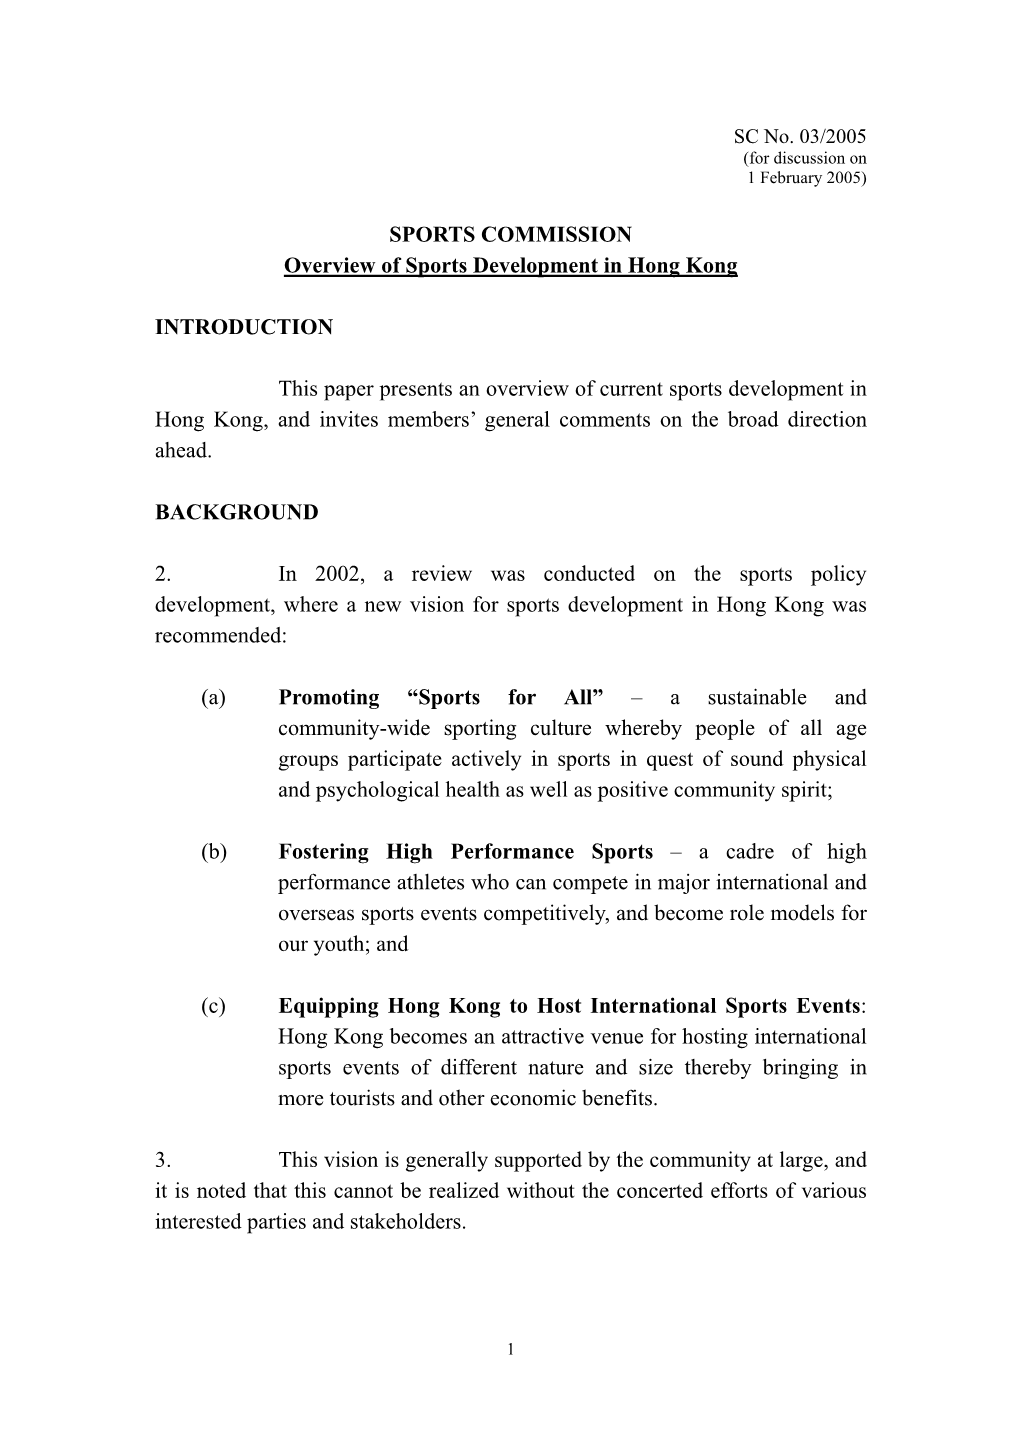 Overview of Sports Development in Hong Kong